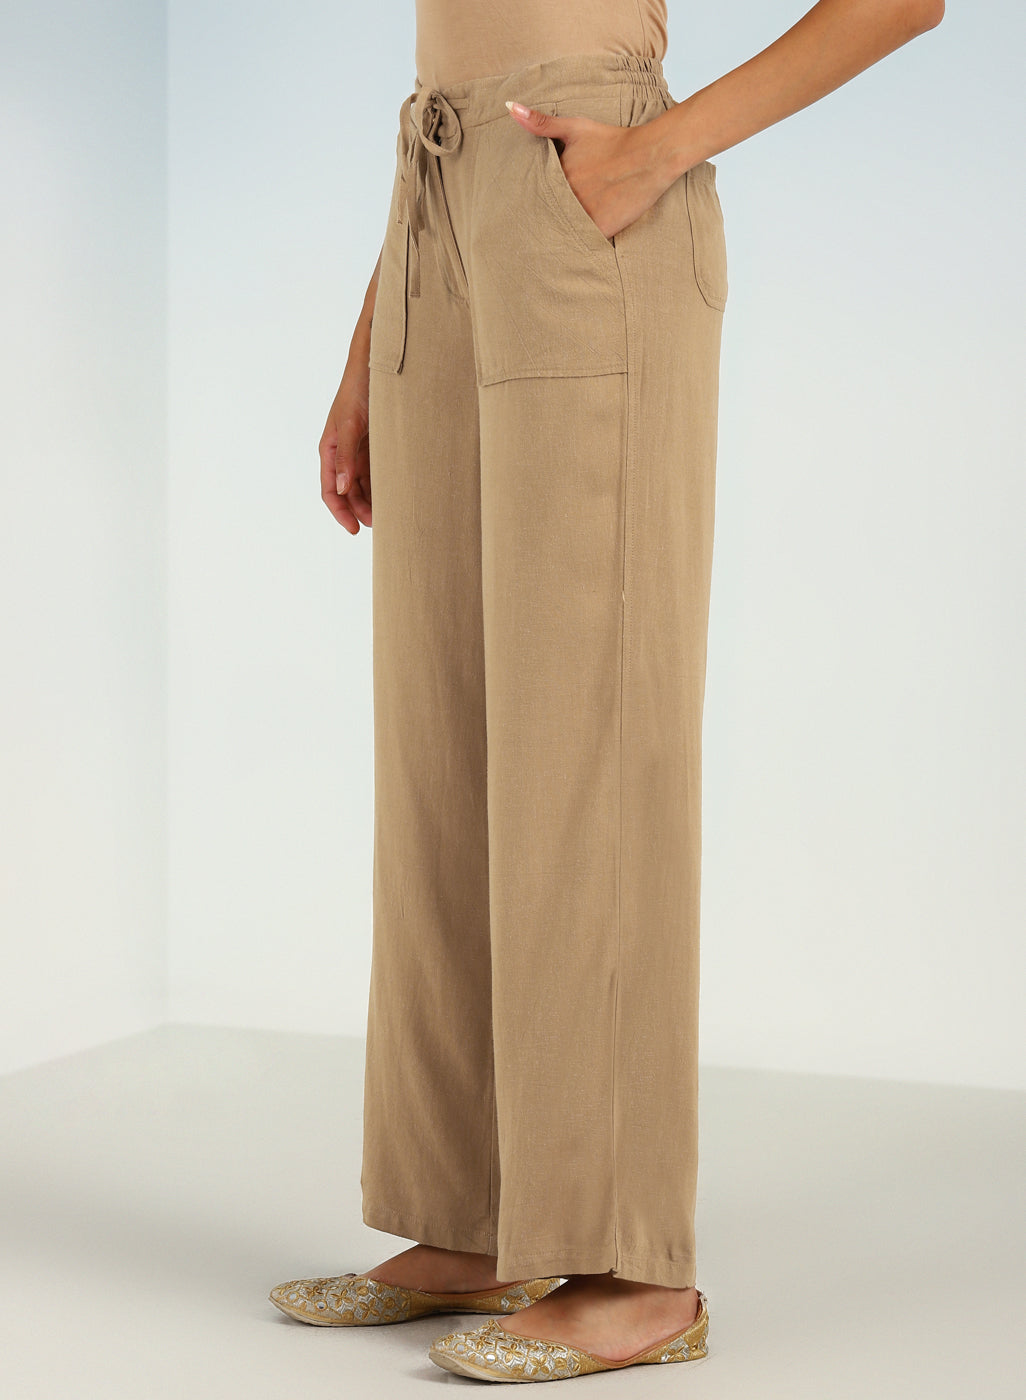 Beige Plain Straight-fit Pants with a Drawstring Waist and Pockets